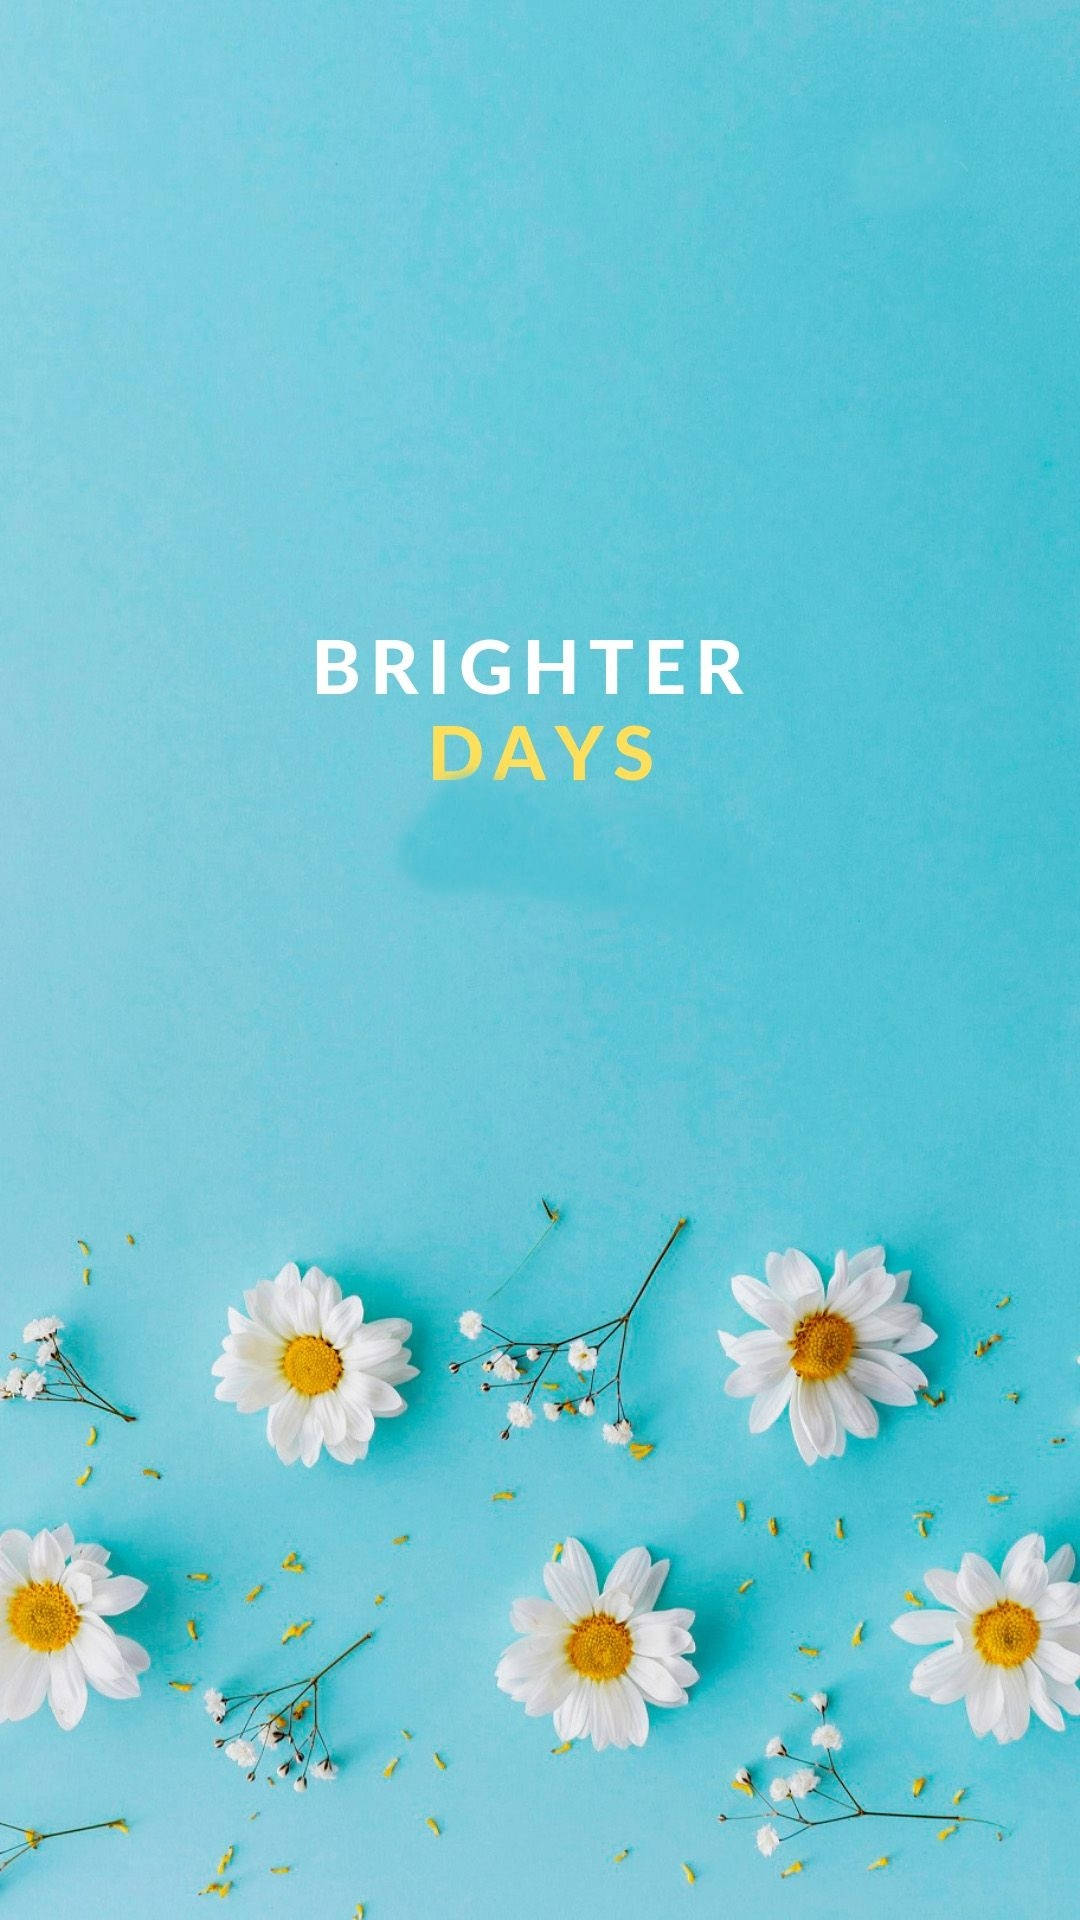 Inspiring Quotes Phone Brighter Days Wallpaper